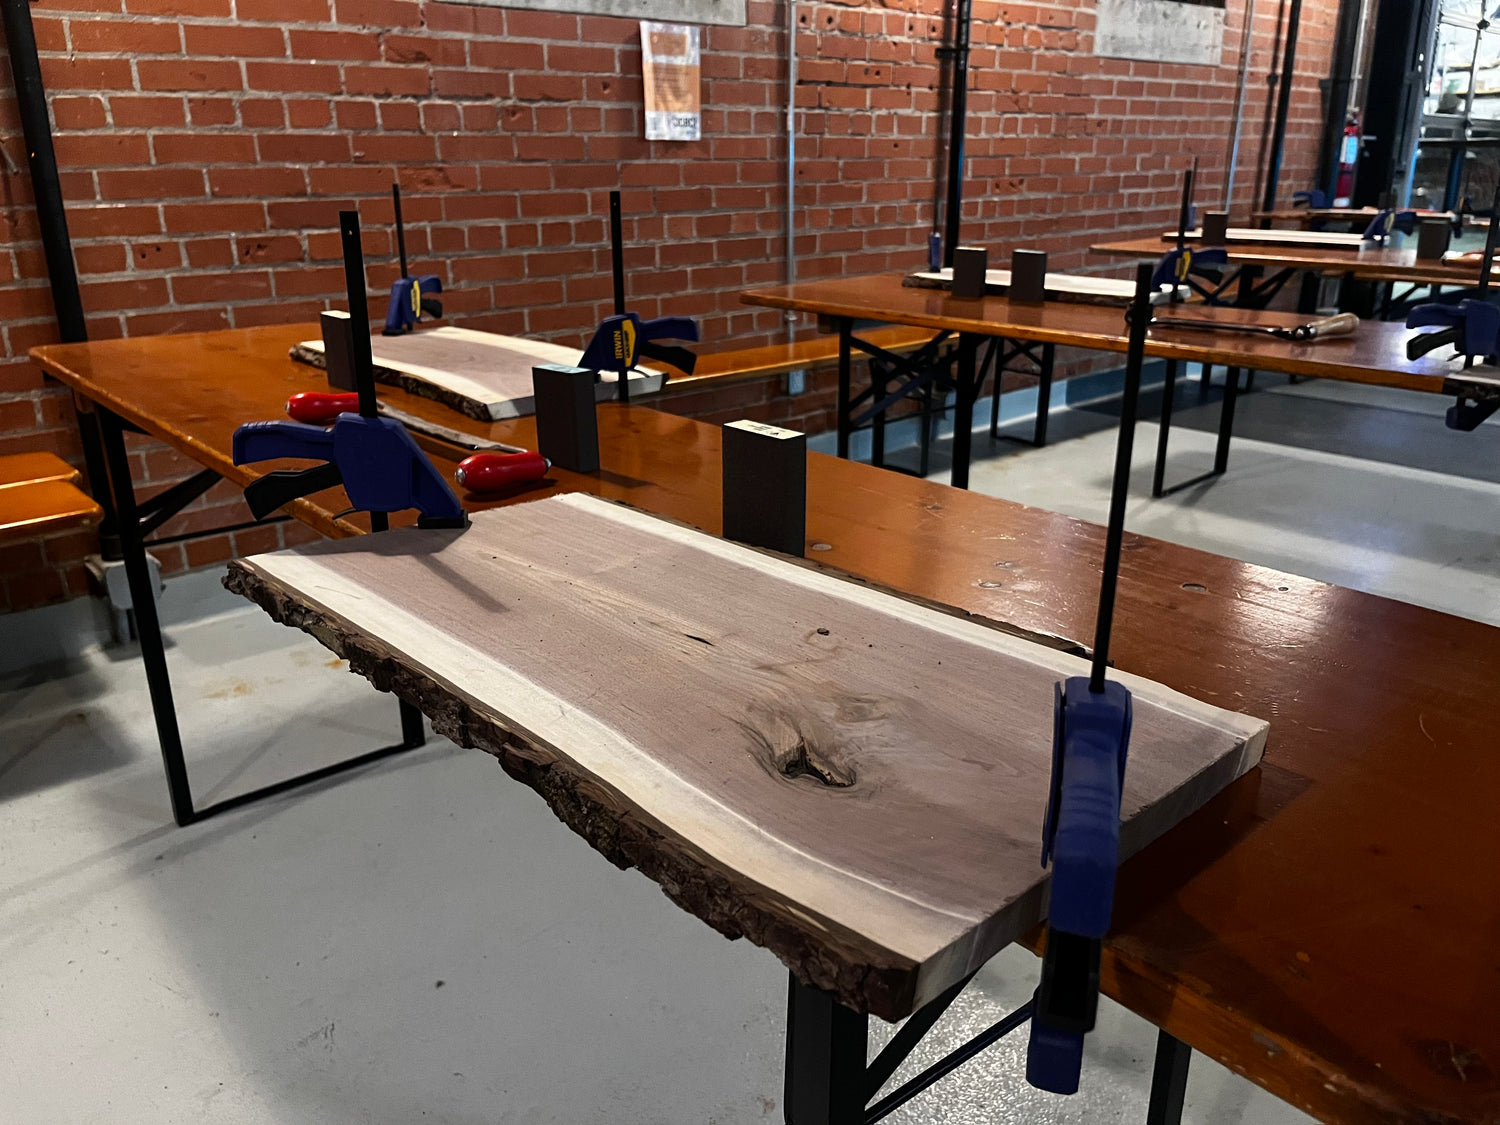 The setup before an event begins. Each station has a 24" slab of walnut wood held down by two clamps, a draw knife and a sanding block.  There are about 15 stations set up in a brewery with a brick wall and windows.